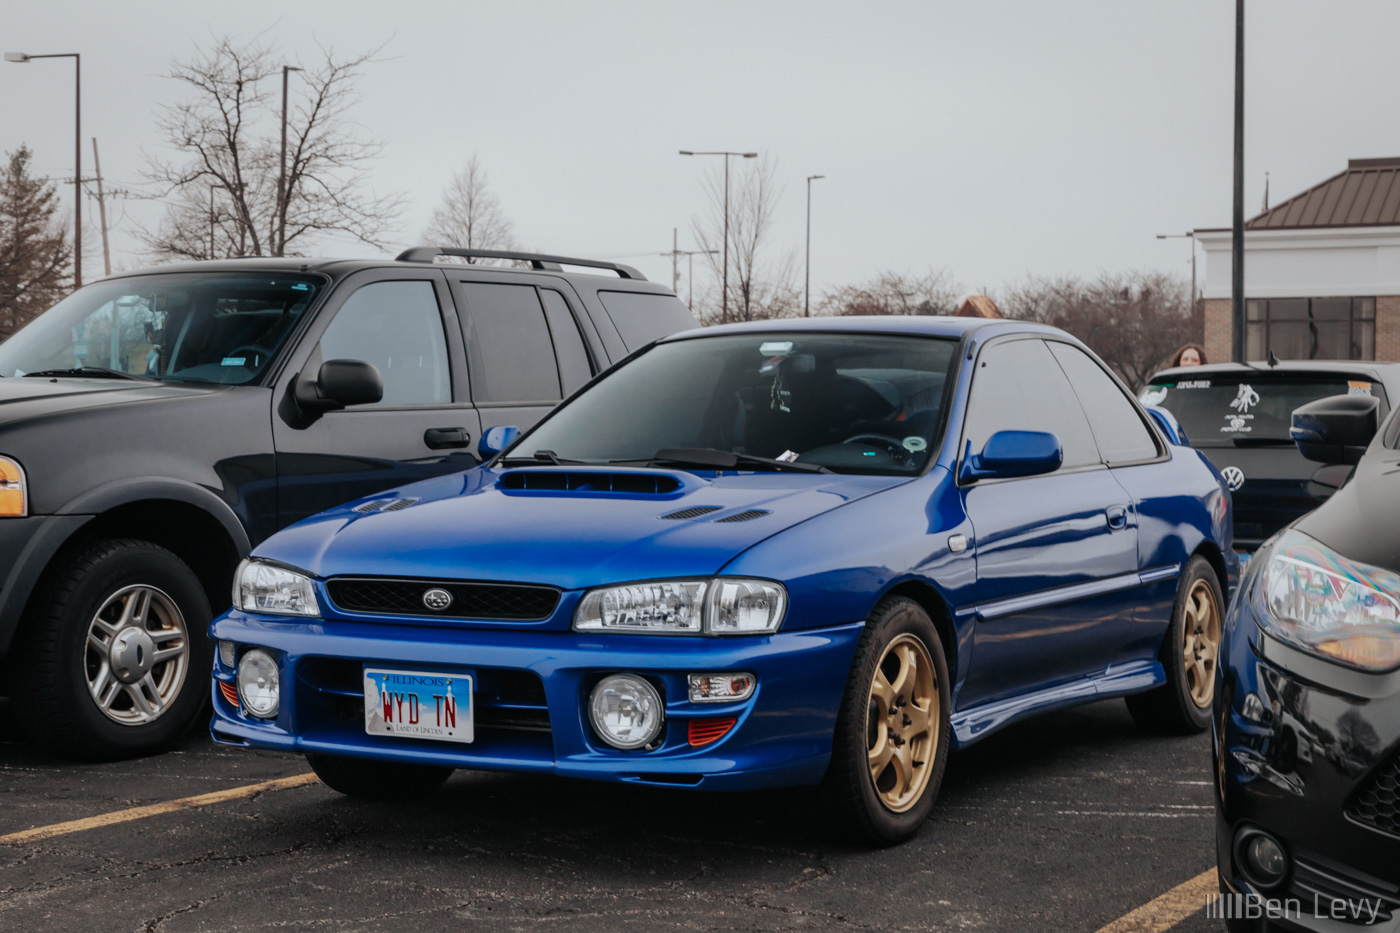 Blue Impreza RS Coupe on Gold Wheels